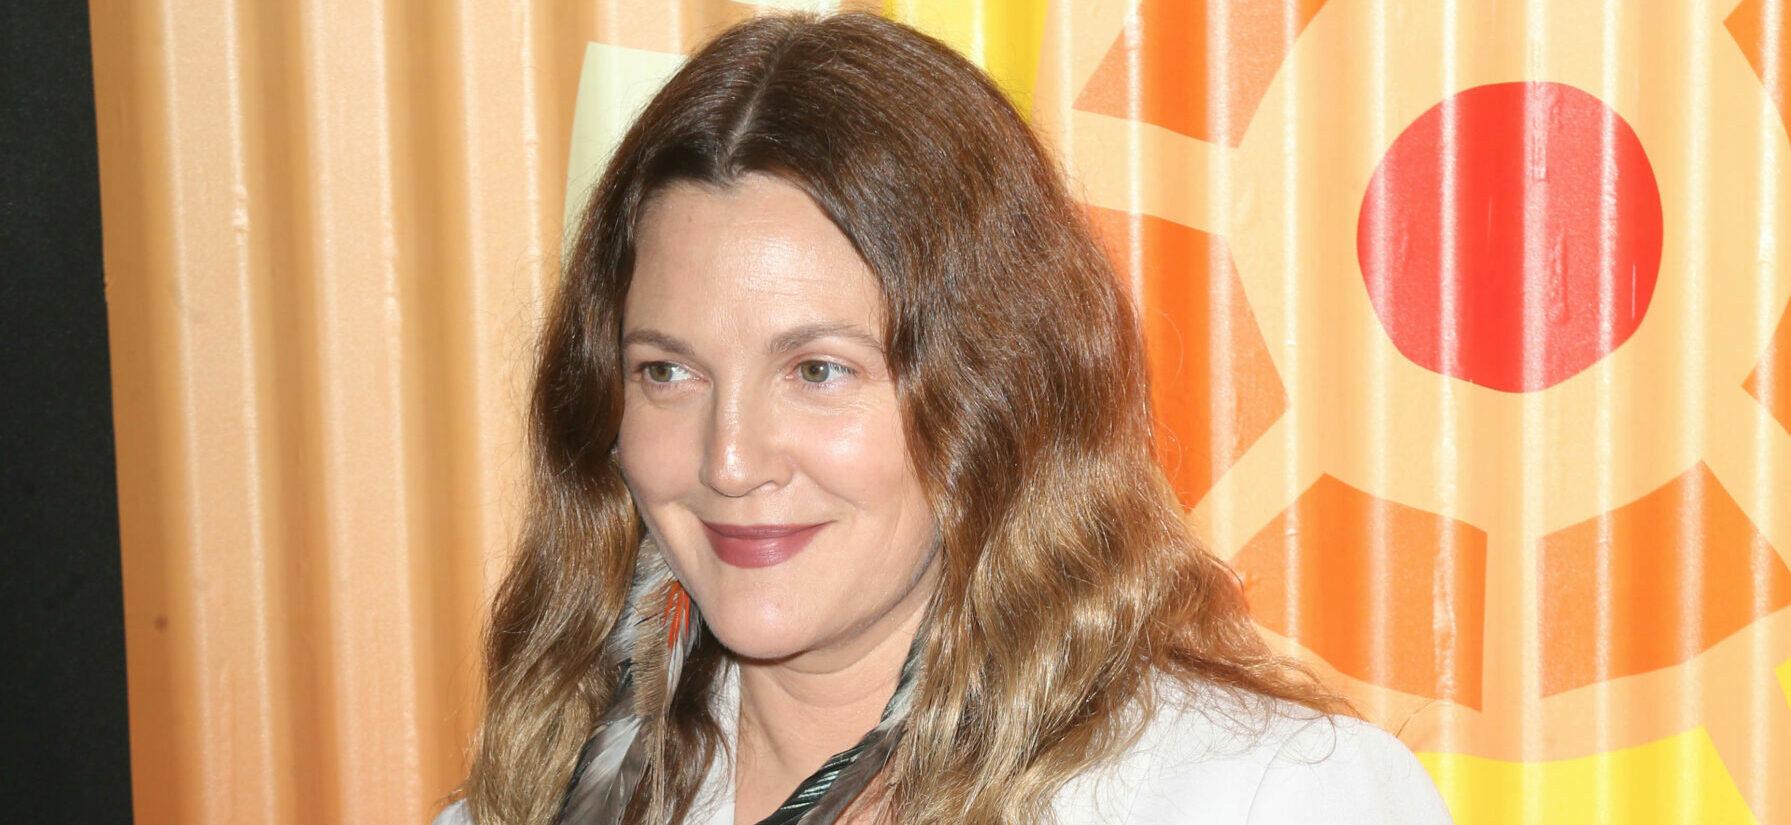 Drew Barrymore Withdraws From Hosting MTV Movie & TV Awards In Solidarity With Striking Writers